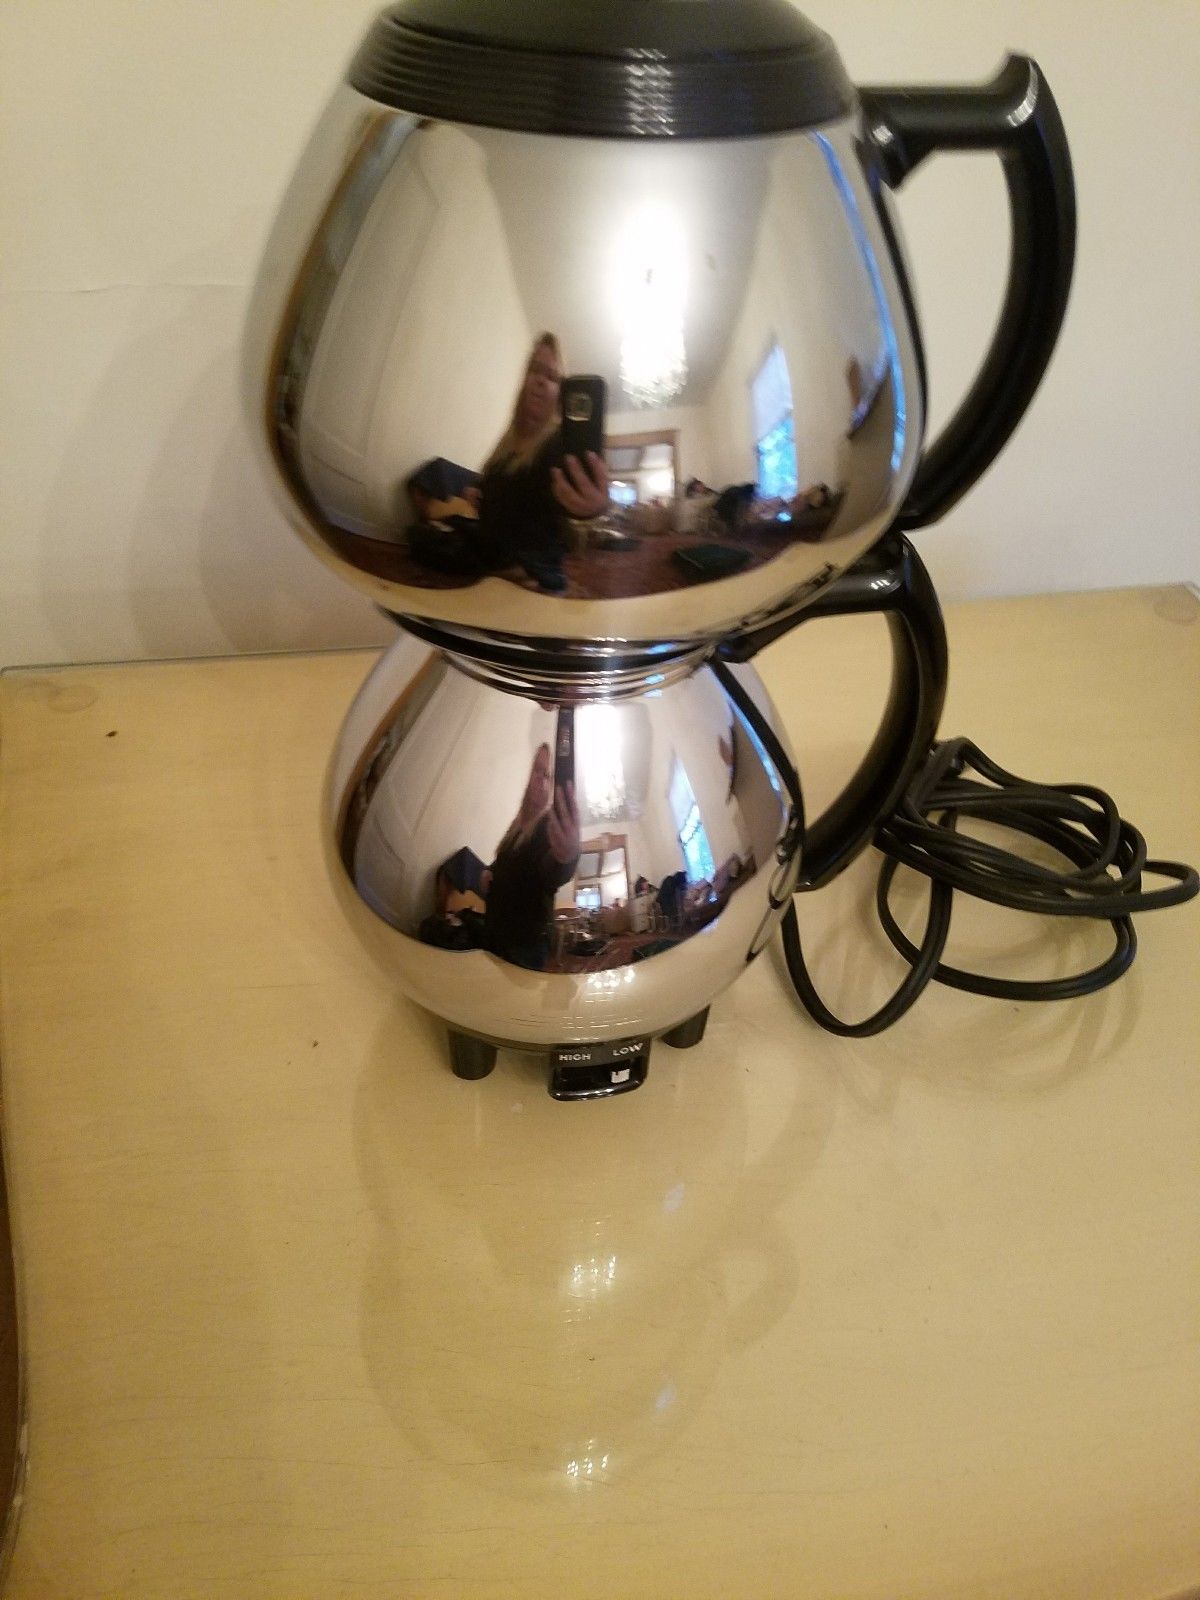 Best Vintage Coffee Maker? Sunbeam C50 Vacuum.  Coffee Kevin brews vacuum  coffee in a vintage Sunbeam maker. These coffee makers were ubiquitous in  kitchens across the US in the 1950s and